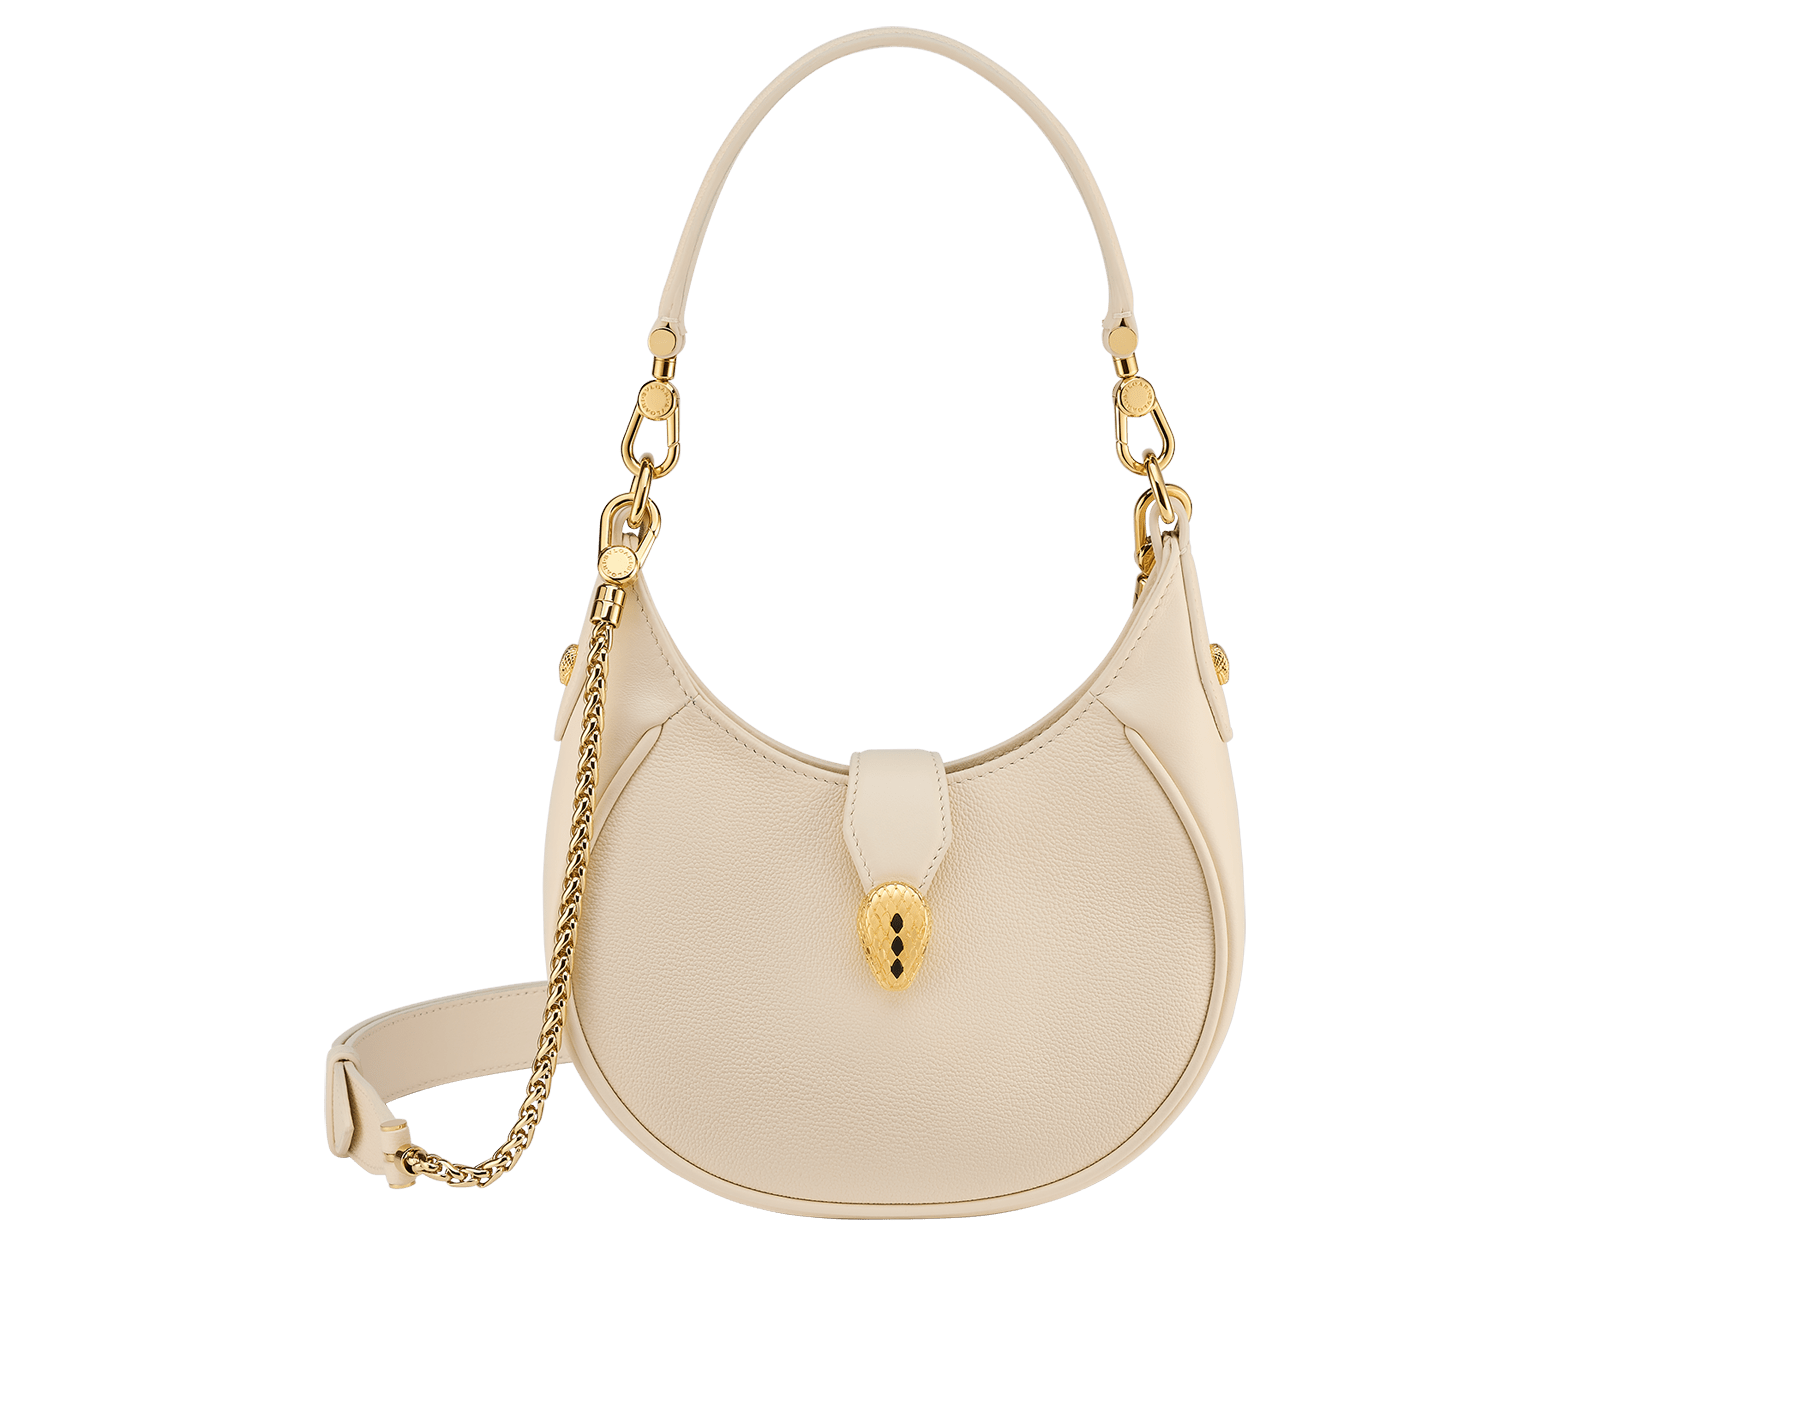 Serpenti Ellipse small crossbody bag in Urban grain and smooth ivory opal calf leather with flamingo quartz pink grosgrain lining. Captivating snakehead closure in gold-plated brass embellished with black onyx scales and red enamel eyes. 1204-UCLa image 1